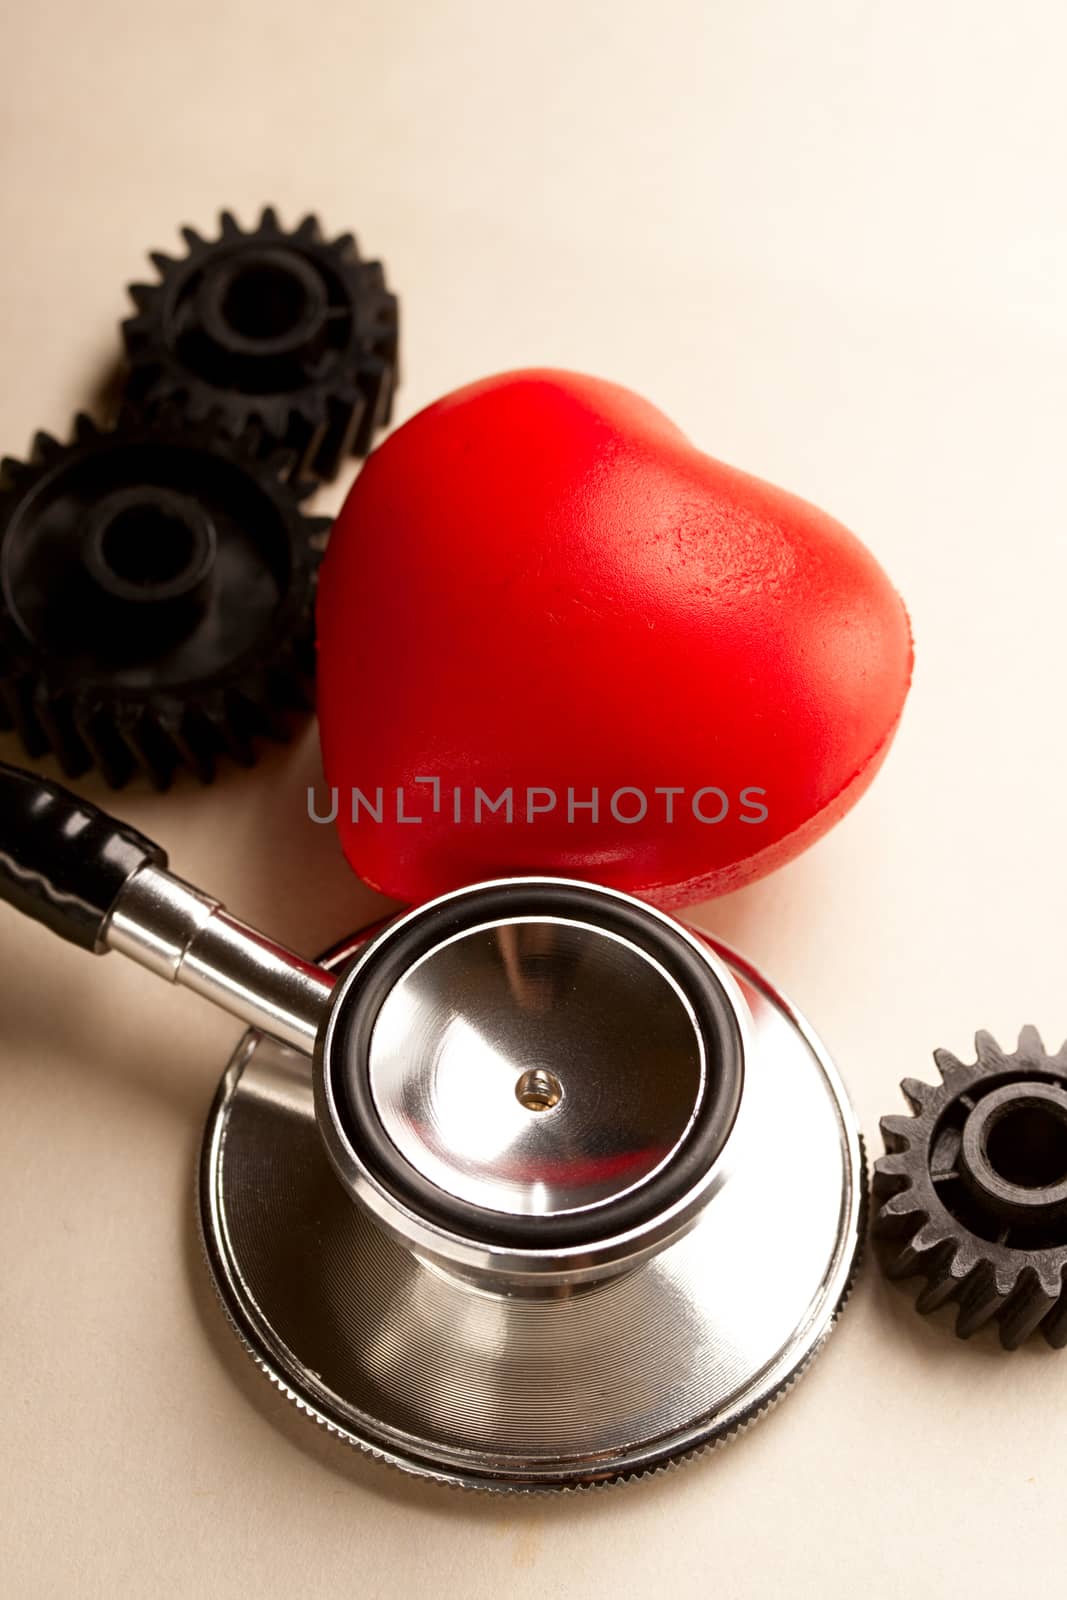 Mechanical ratchets, stethoscope and red heart by Garsya